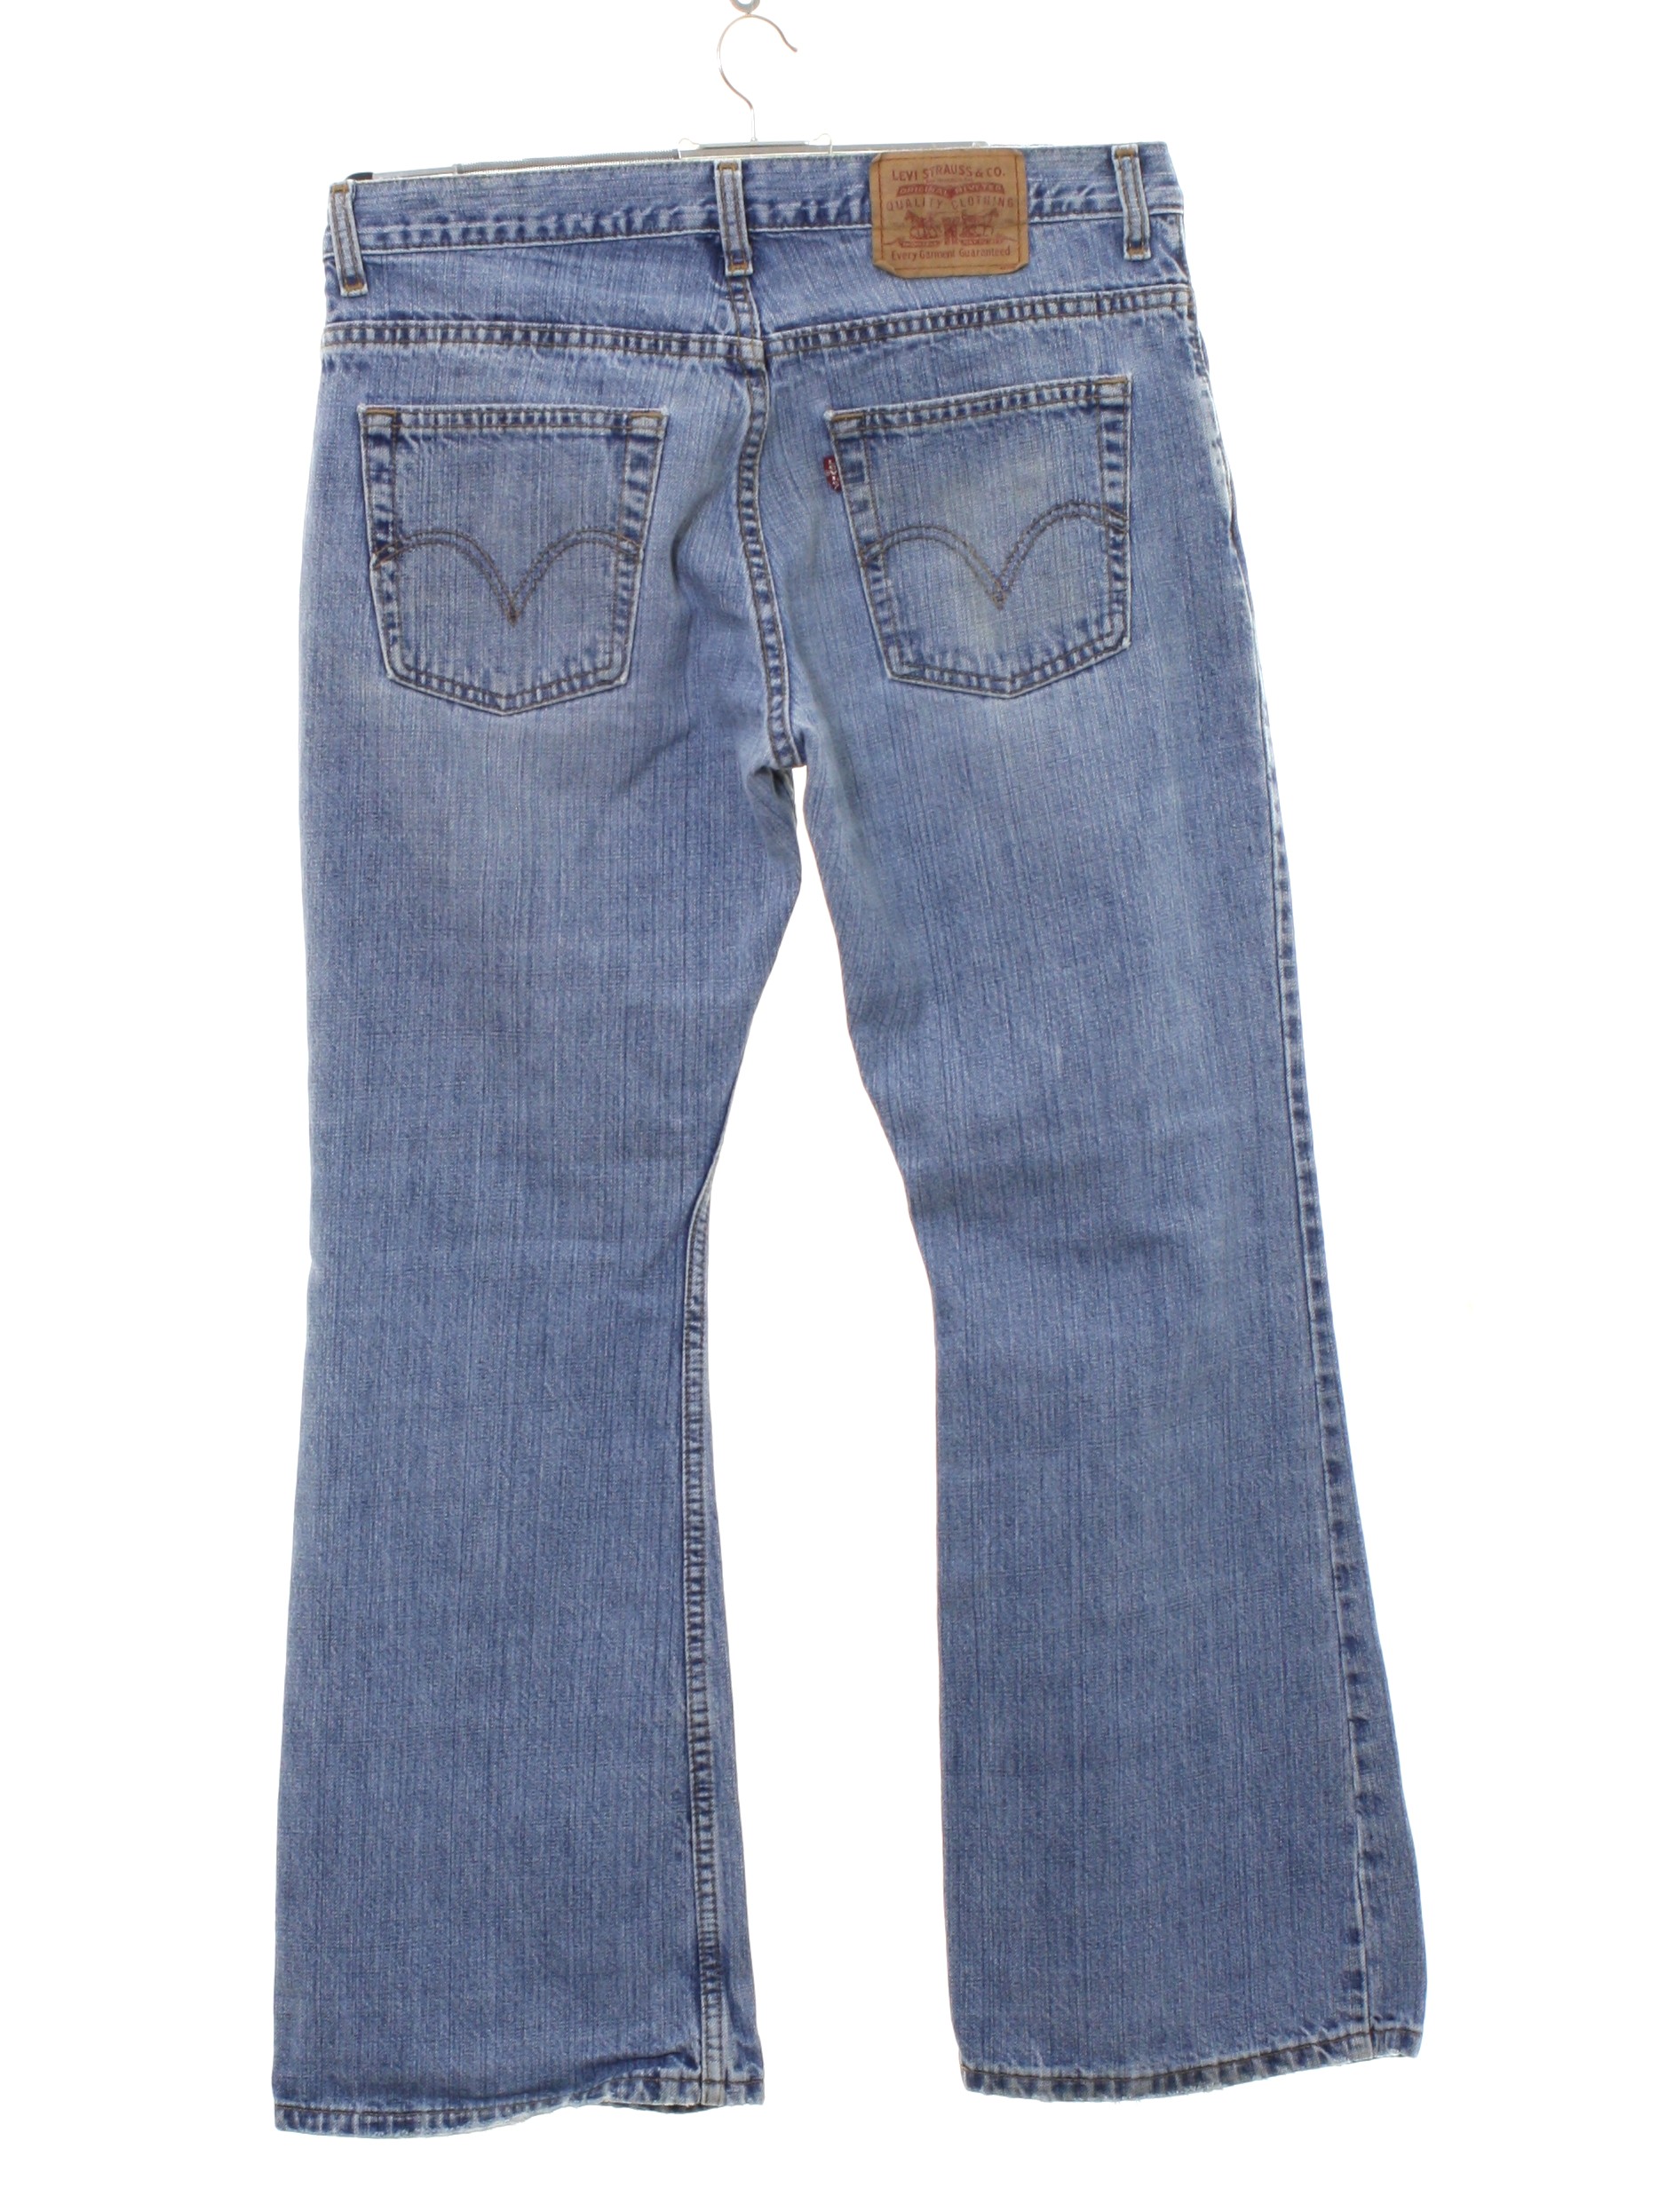 Nineties Levis 507 Flared Pants / Flares: 90s or newer -Levis 507 ...